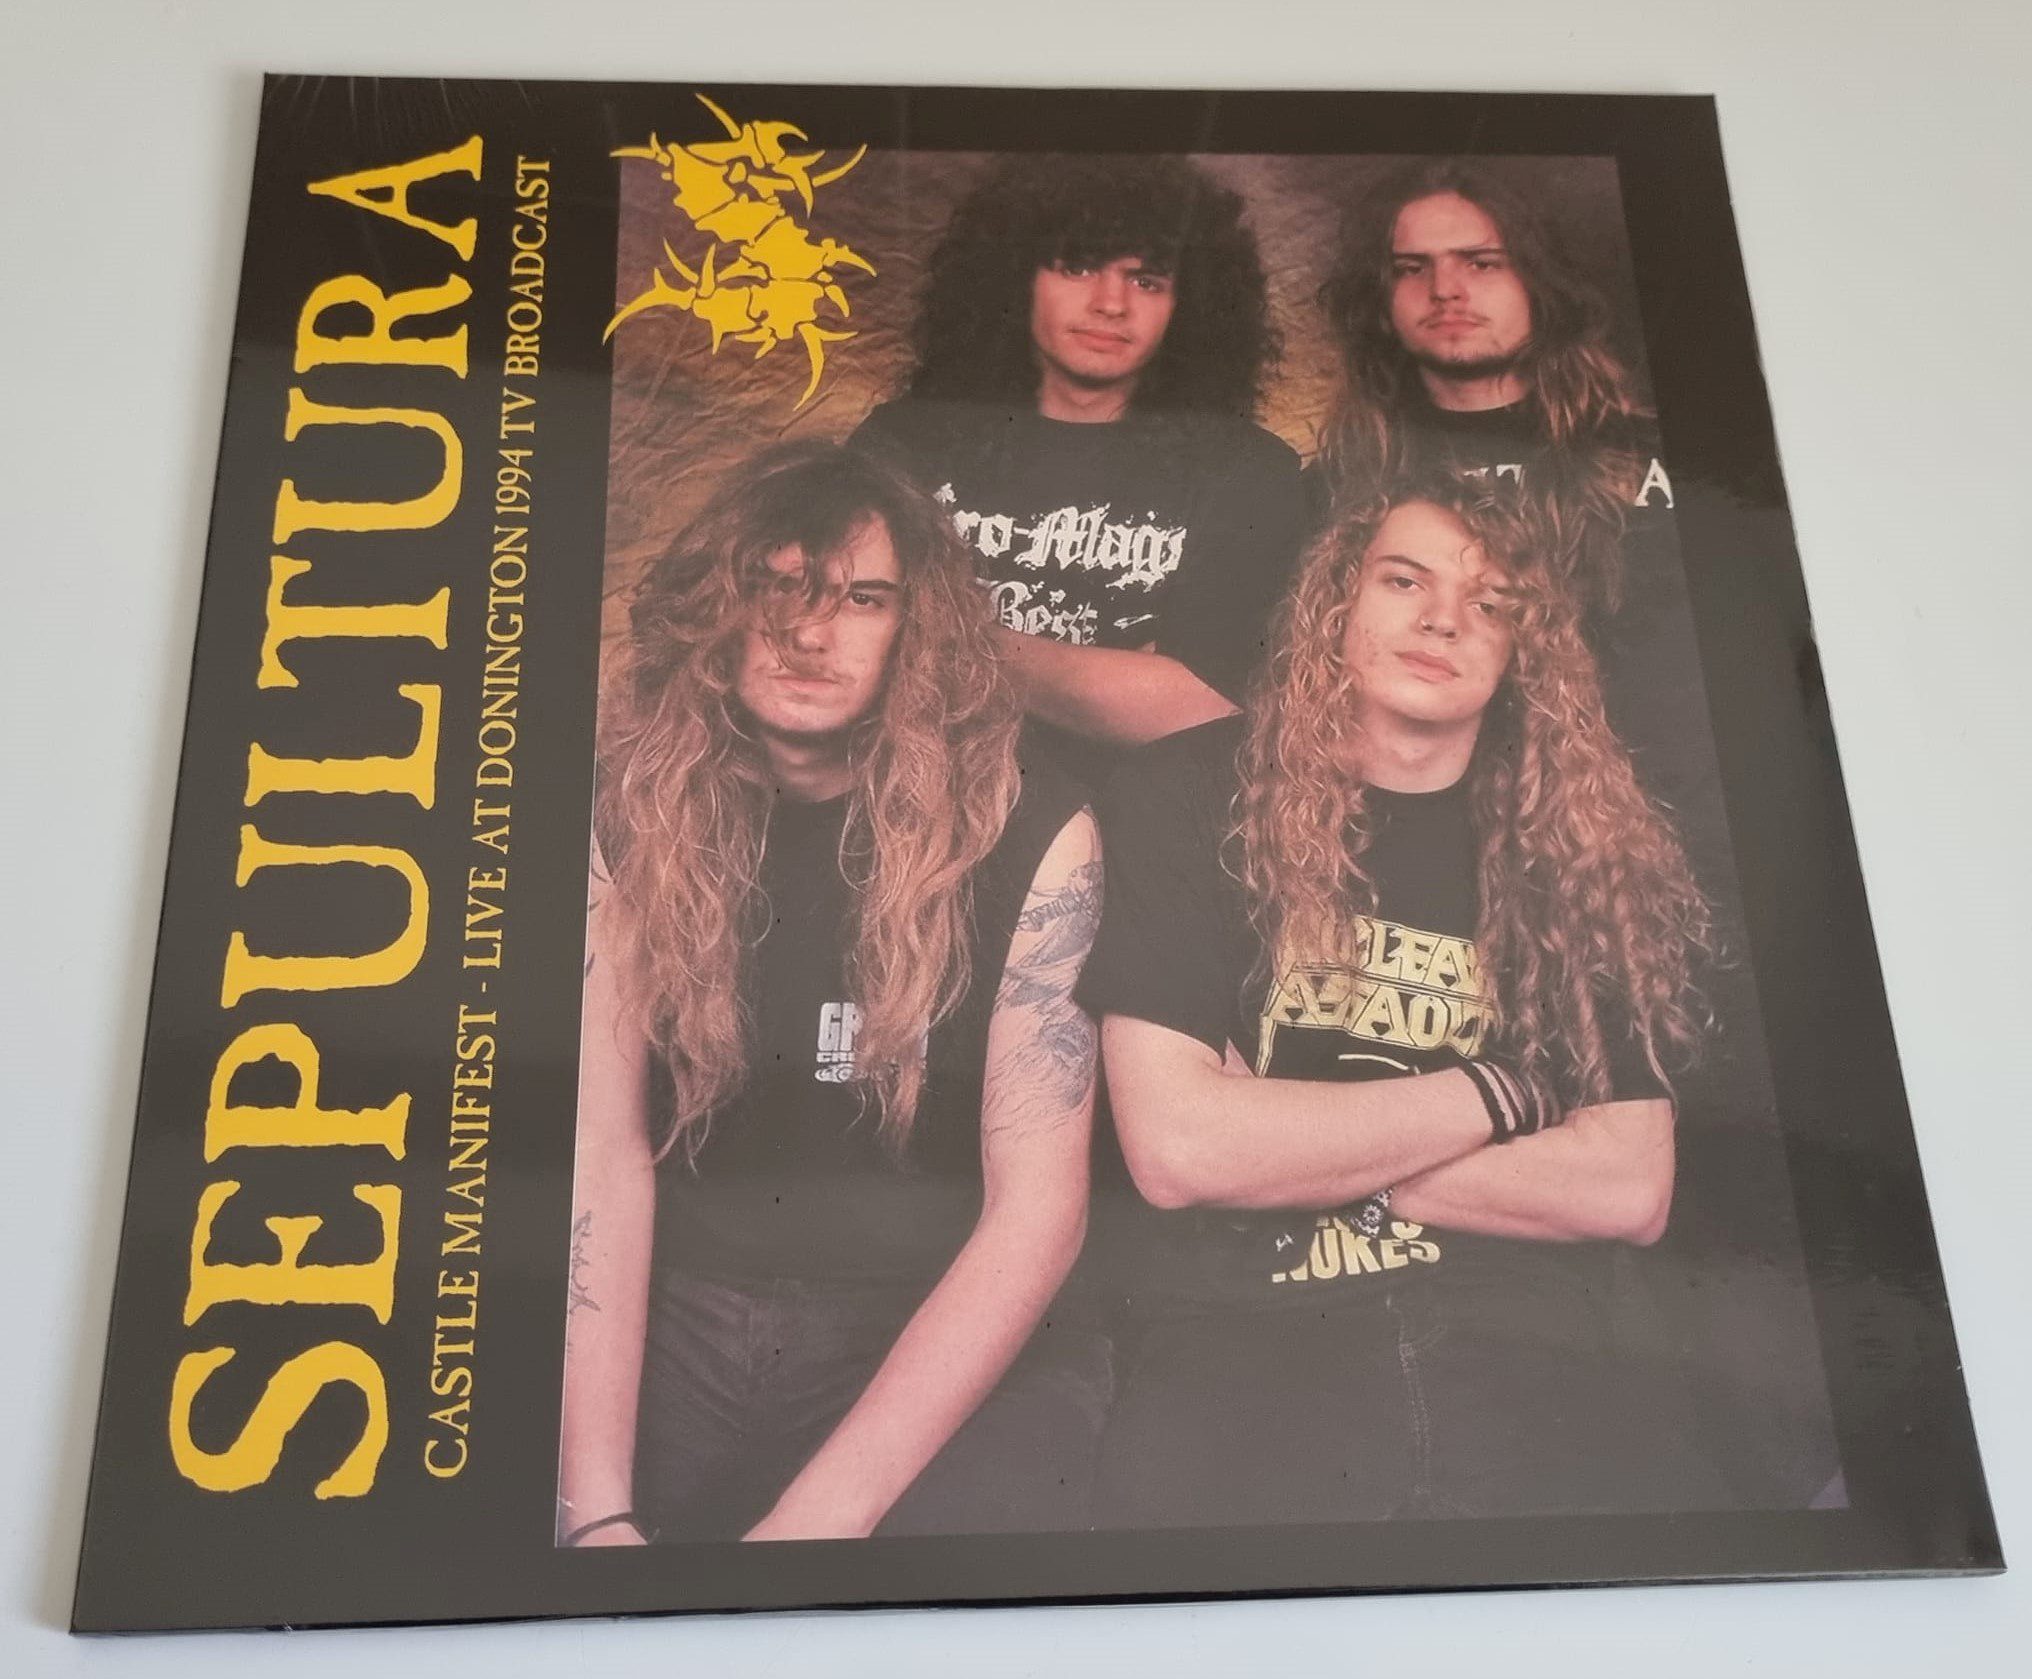 Buy this rare Sepultura record by clicking here